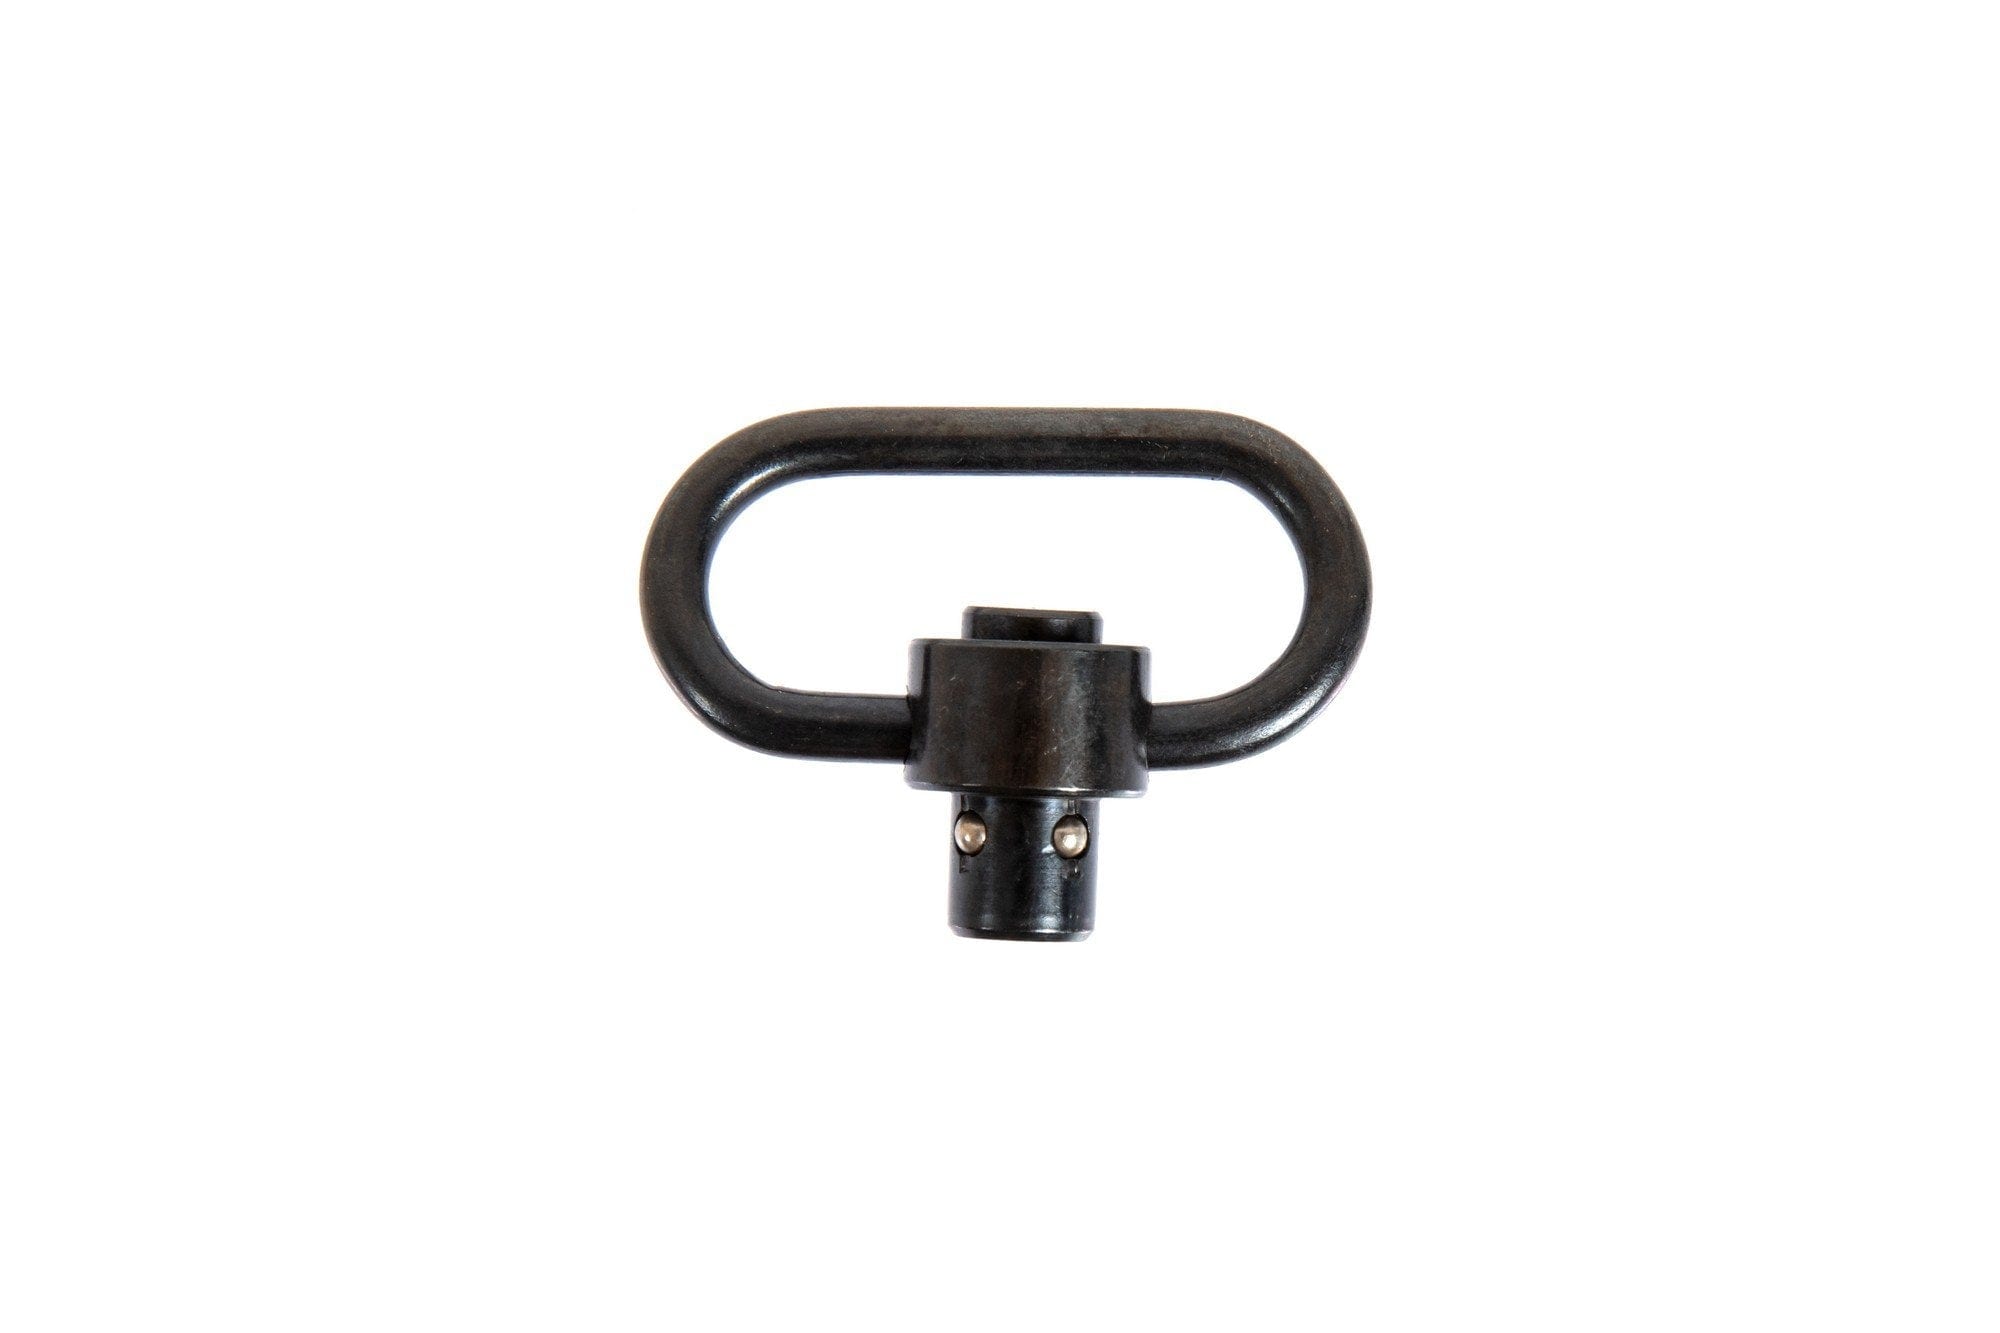 Steel QD sling swivel by Specna Arms on Airsoft Mania Europe